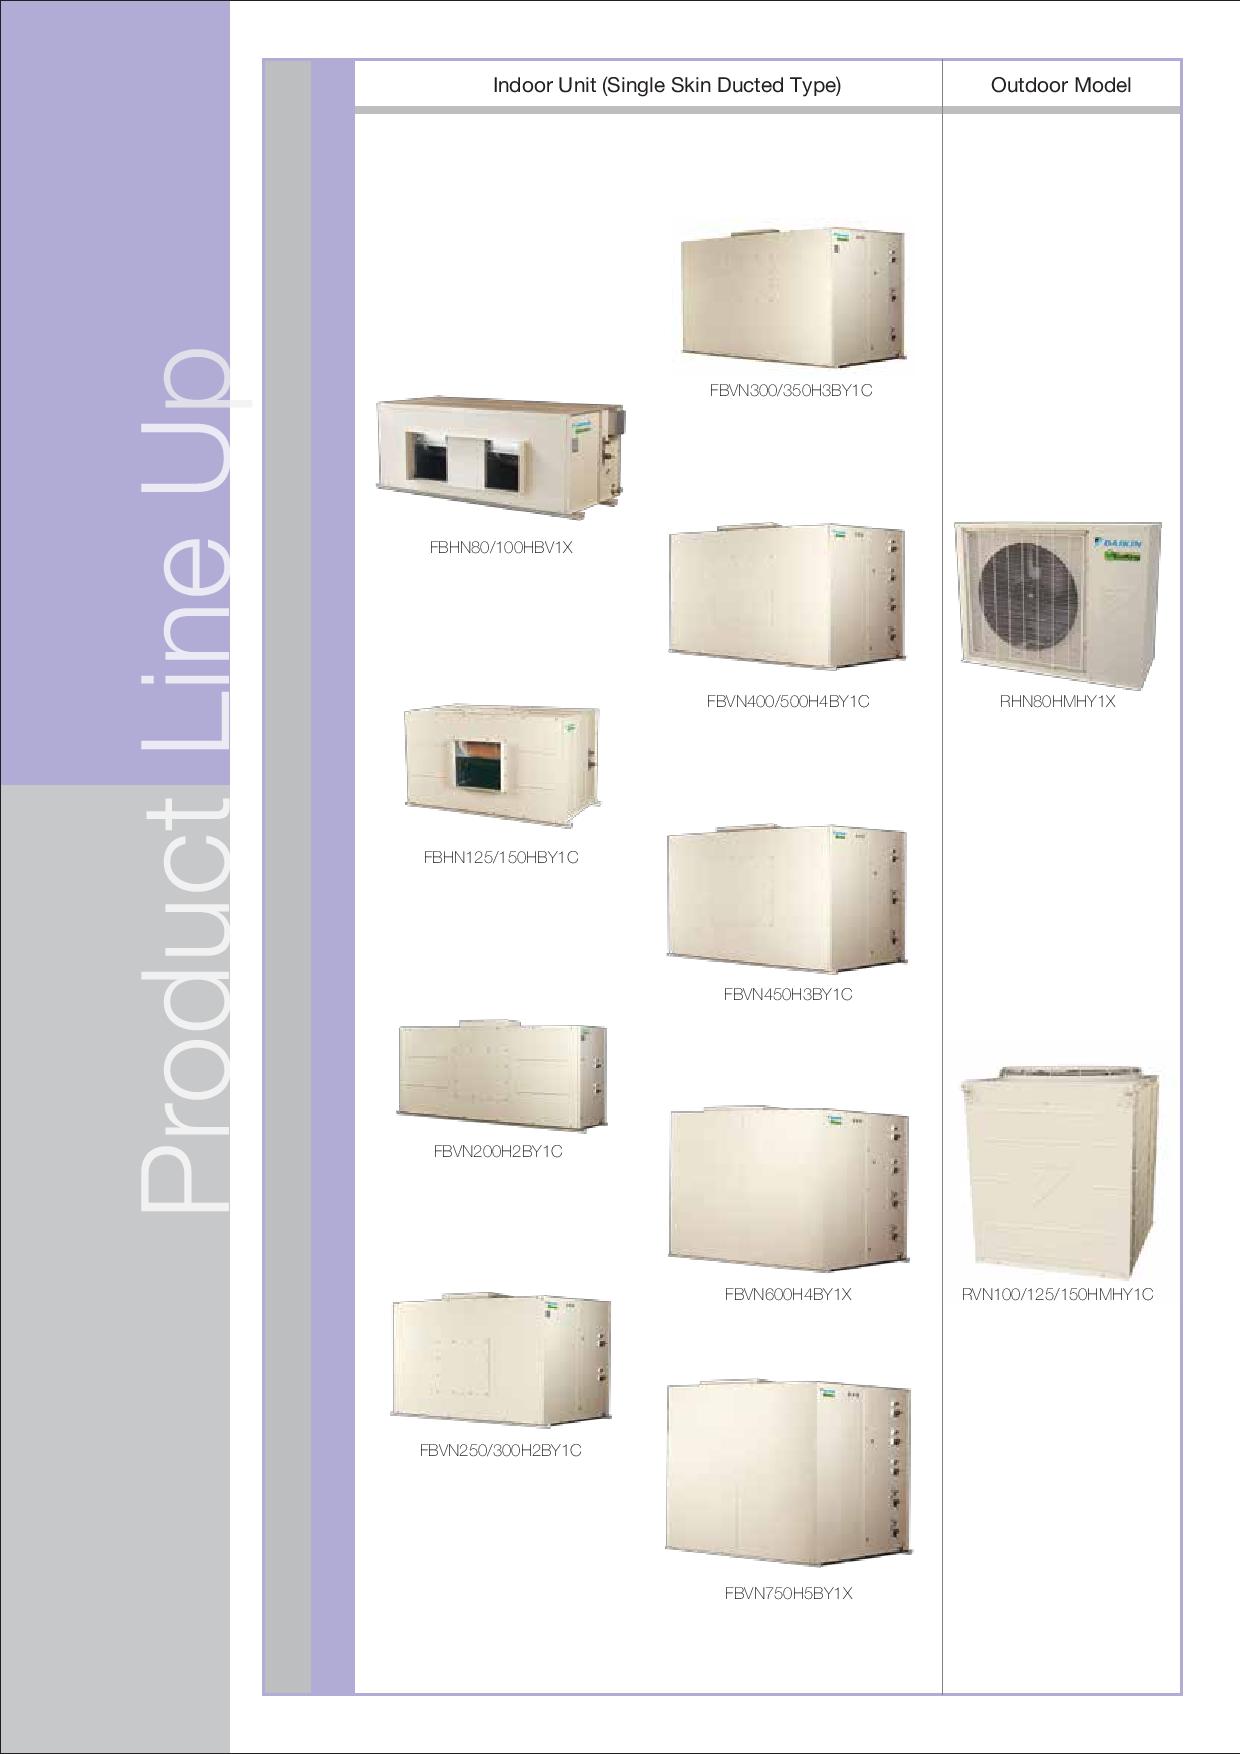 daikin ducted air conditioning control panel symbols